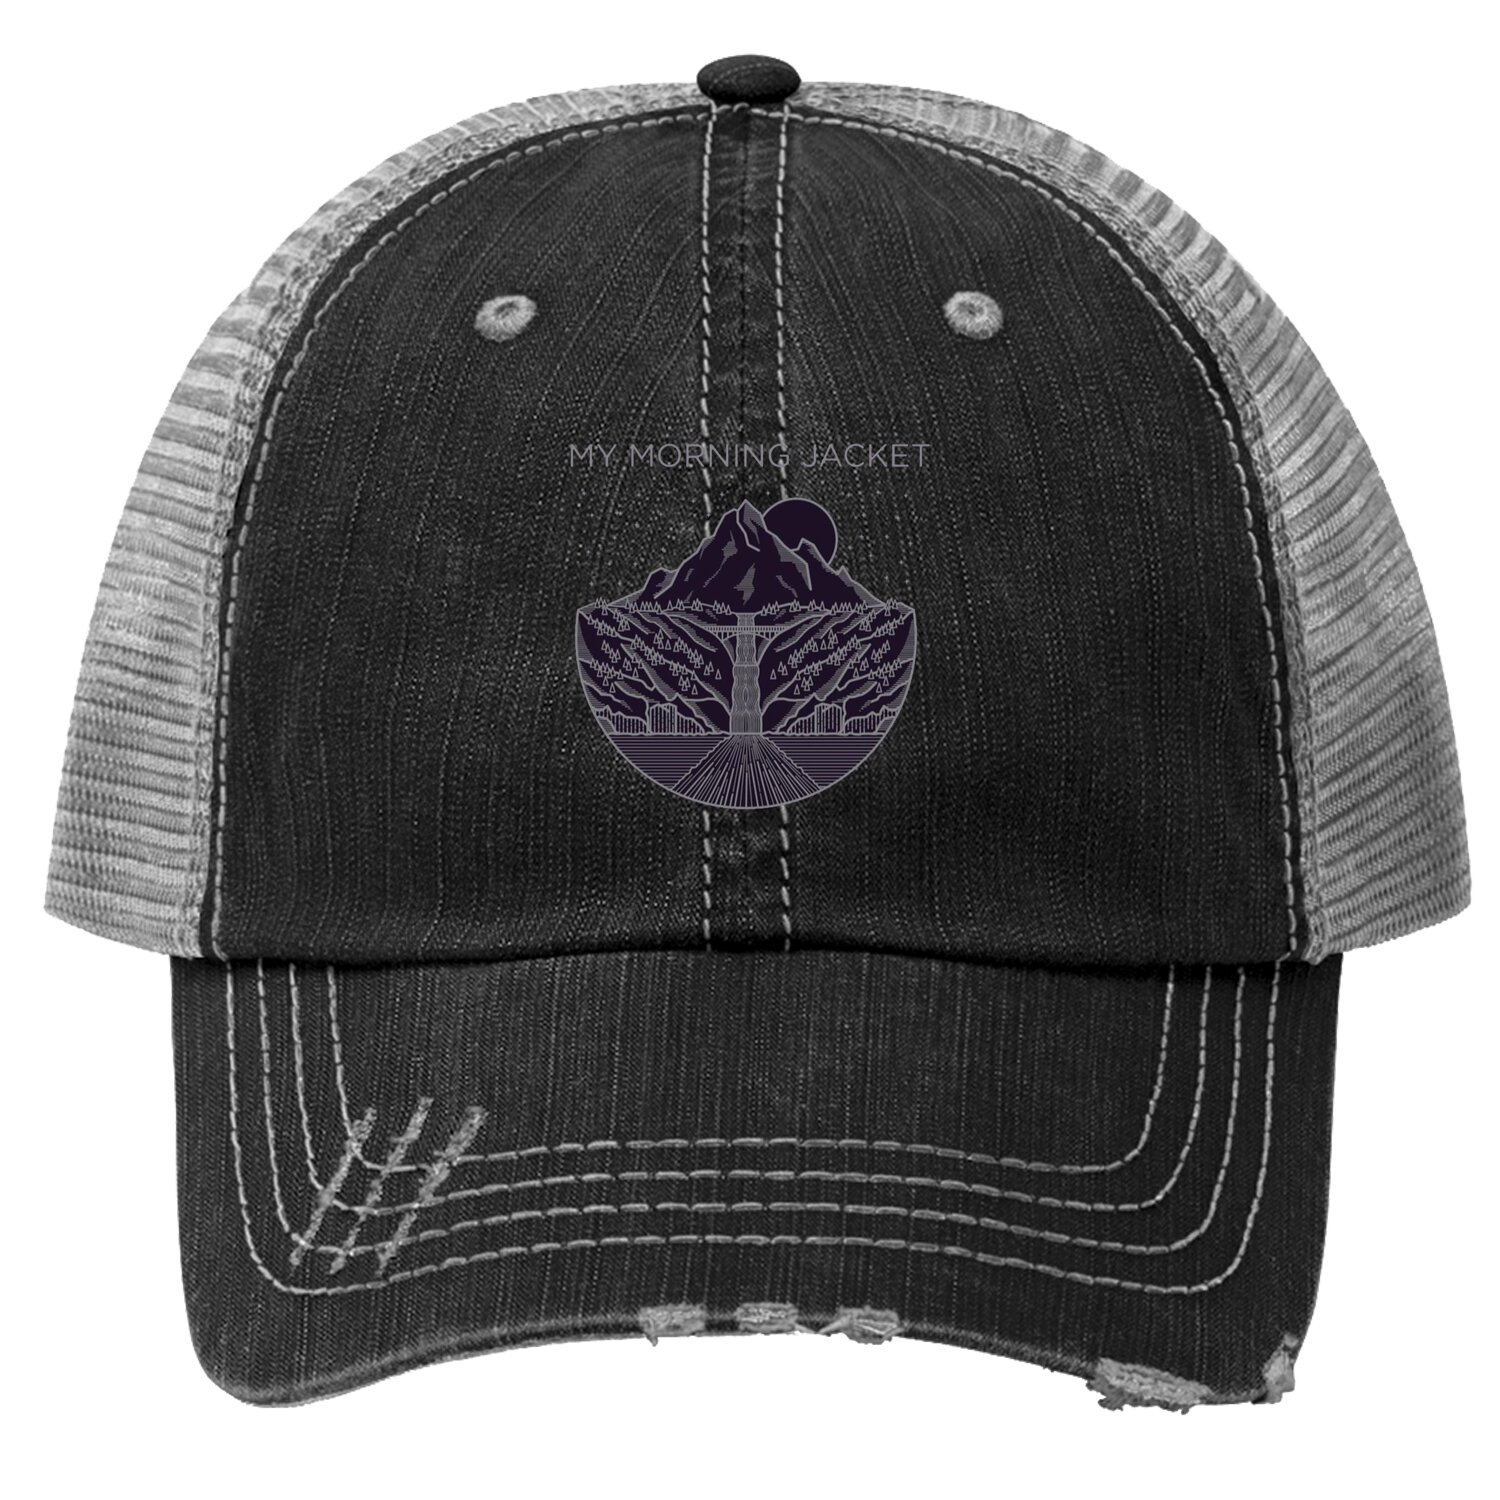 Metro Parks Trucker Hat – My Morning Jacket Official Merchandise